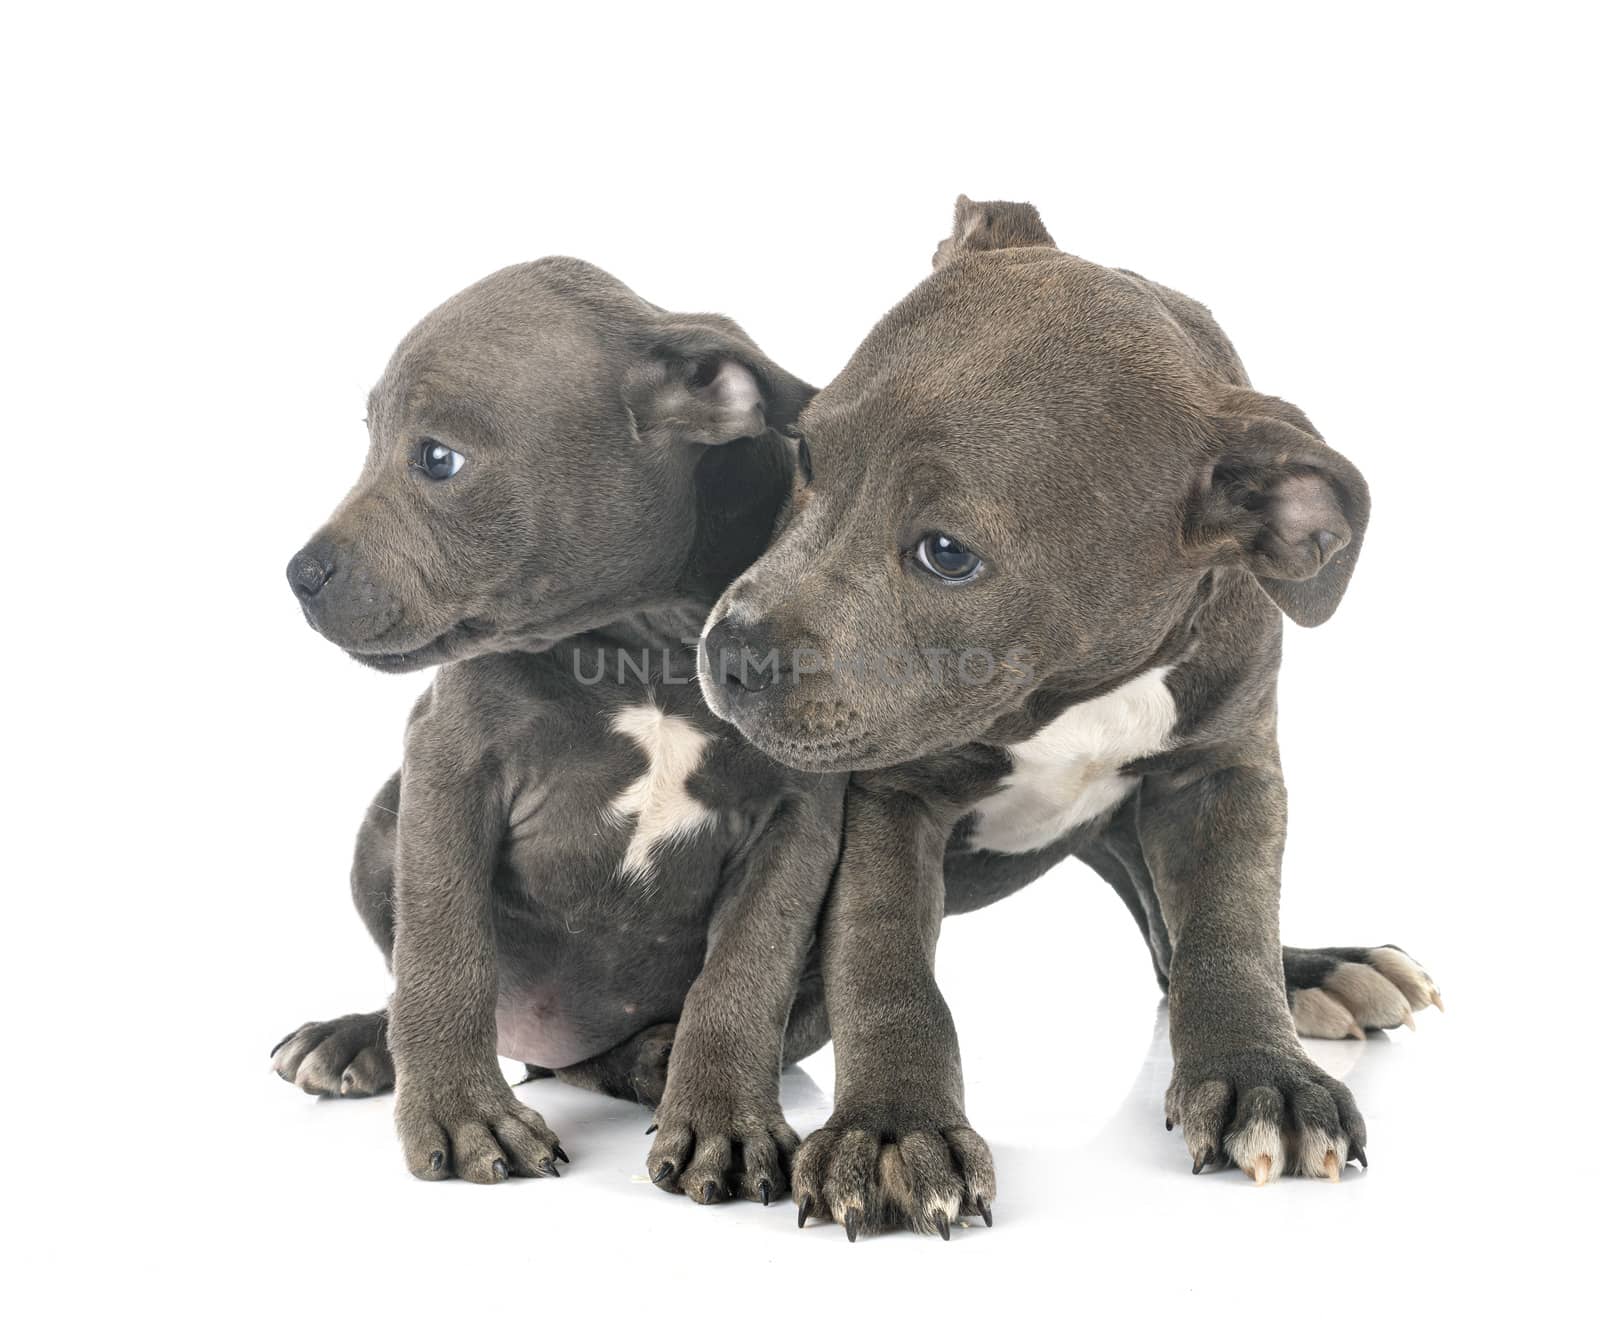 puppies staffordshire bull terrier in front of white background